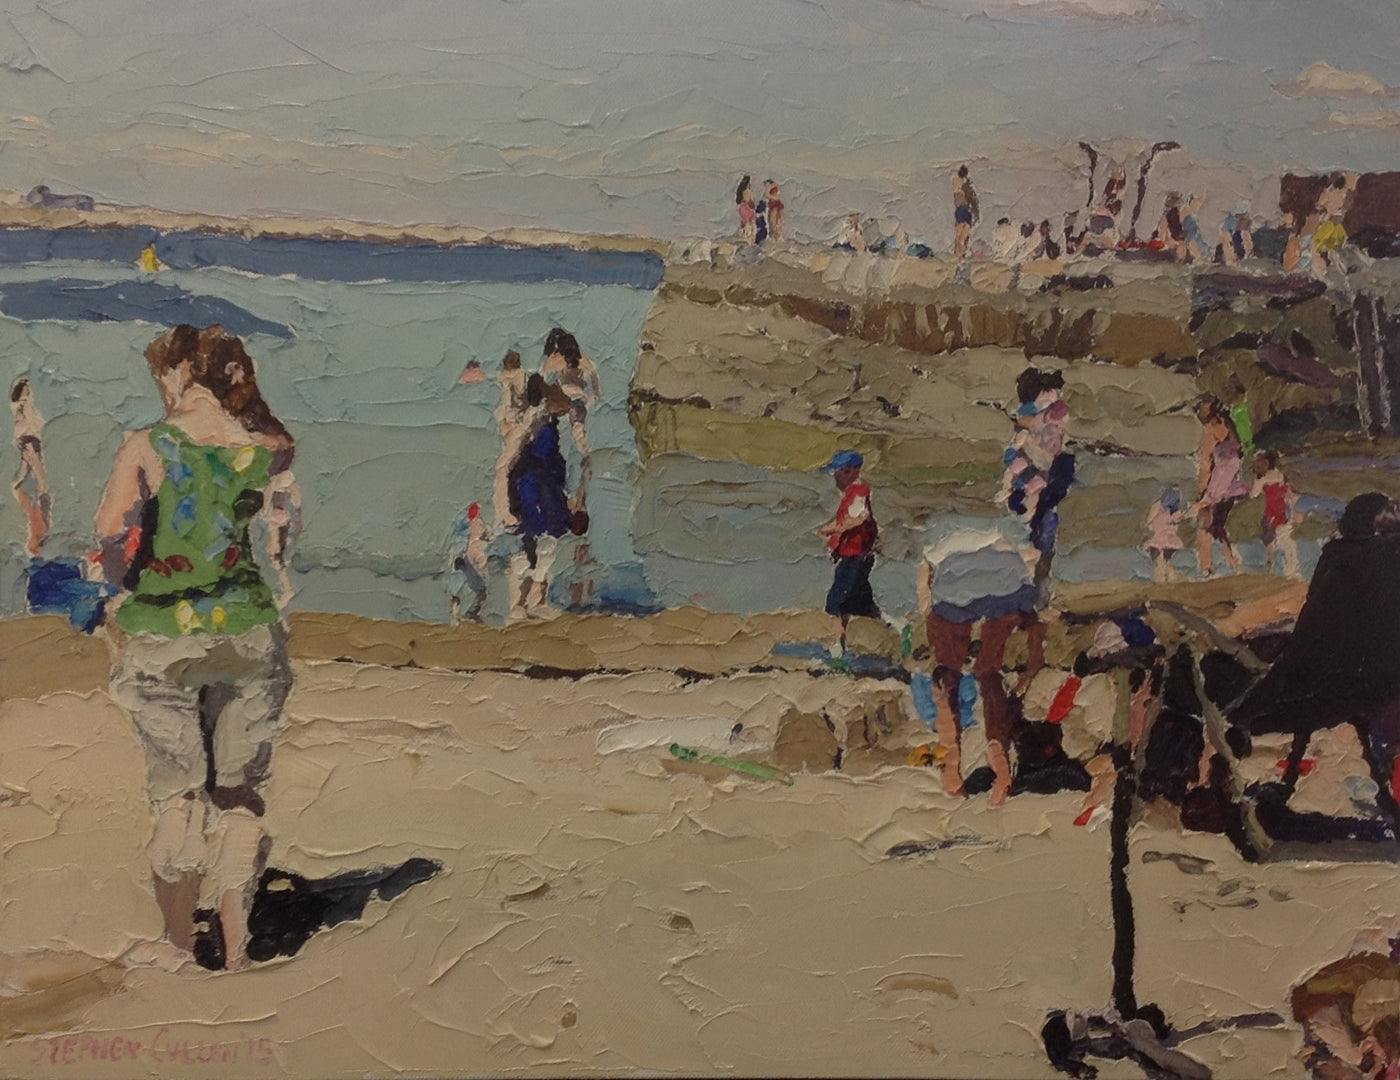 People Watching, Sandycove by Stephen Cullen - Green Gallery